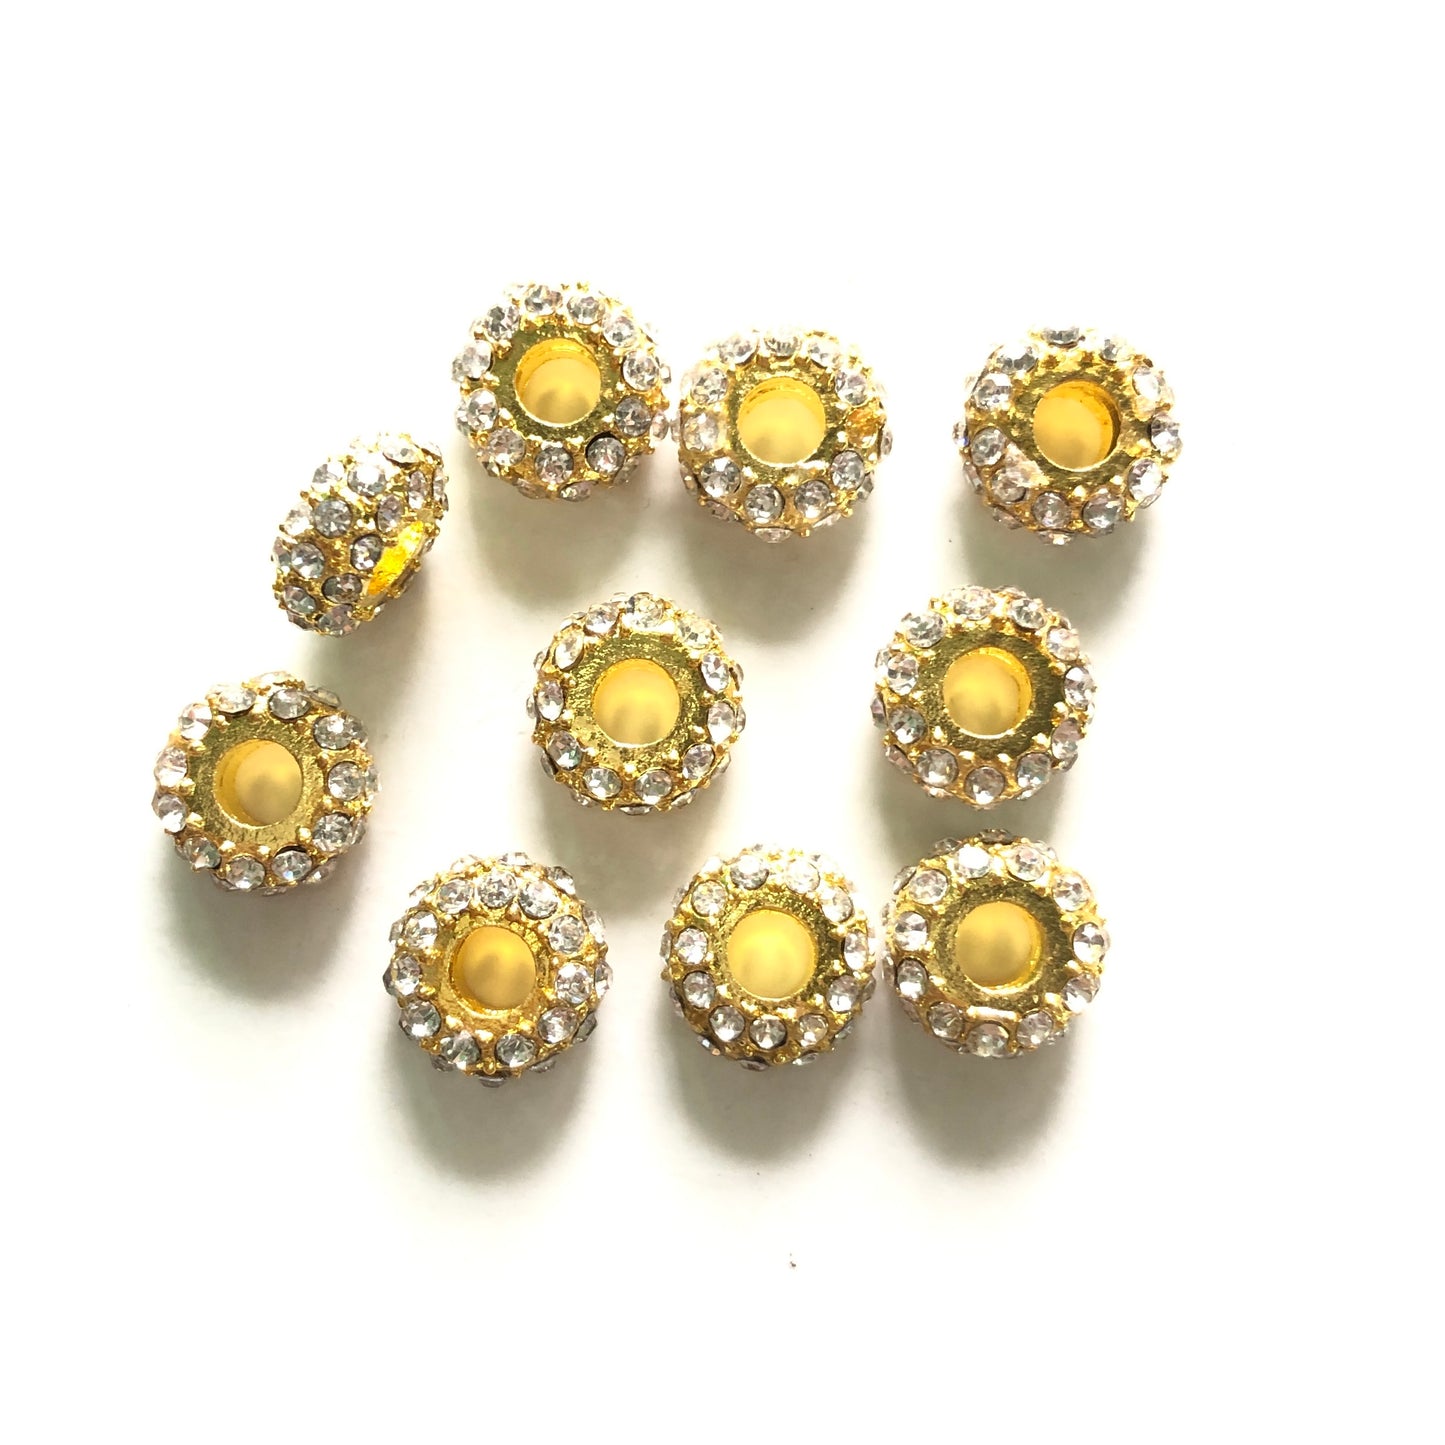 20-50pcs/lot 8mm Clear Rhinestone Paved Alloy Wheel Spacers Gold Alloy Spacers & Wholesale Charms Beads Beyond